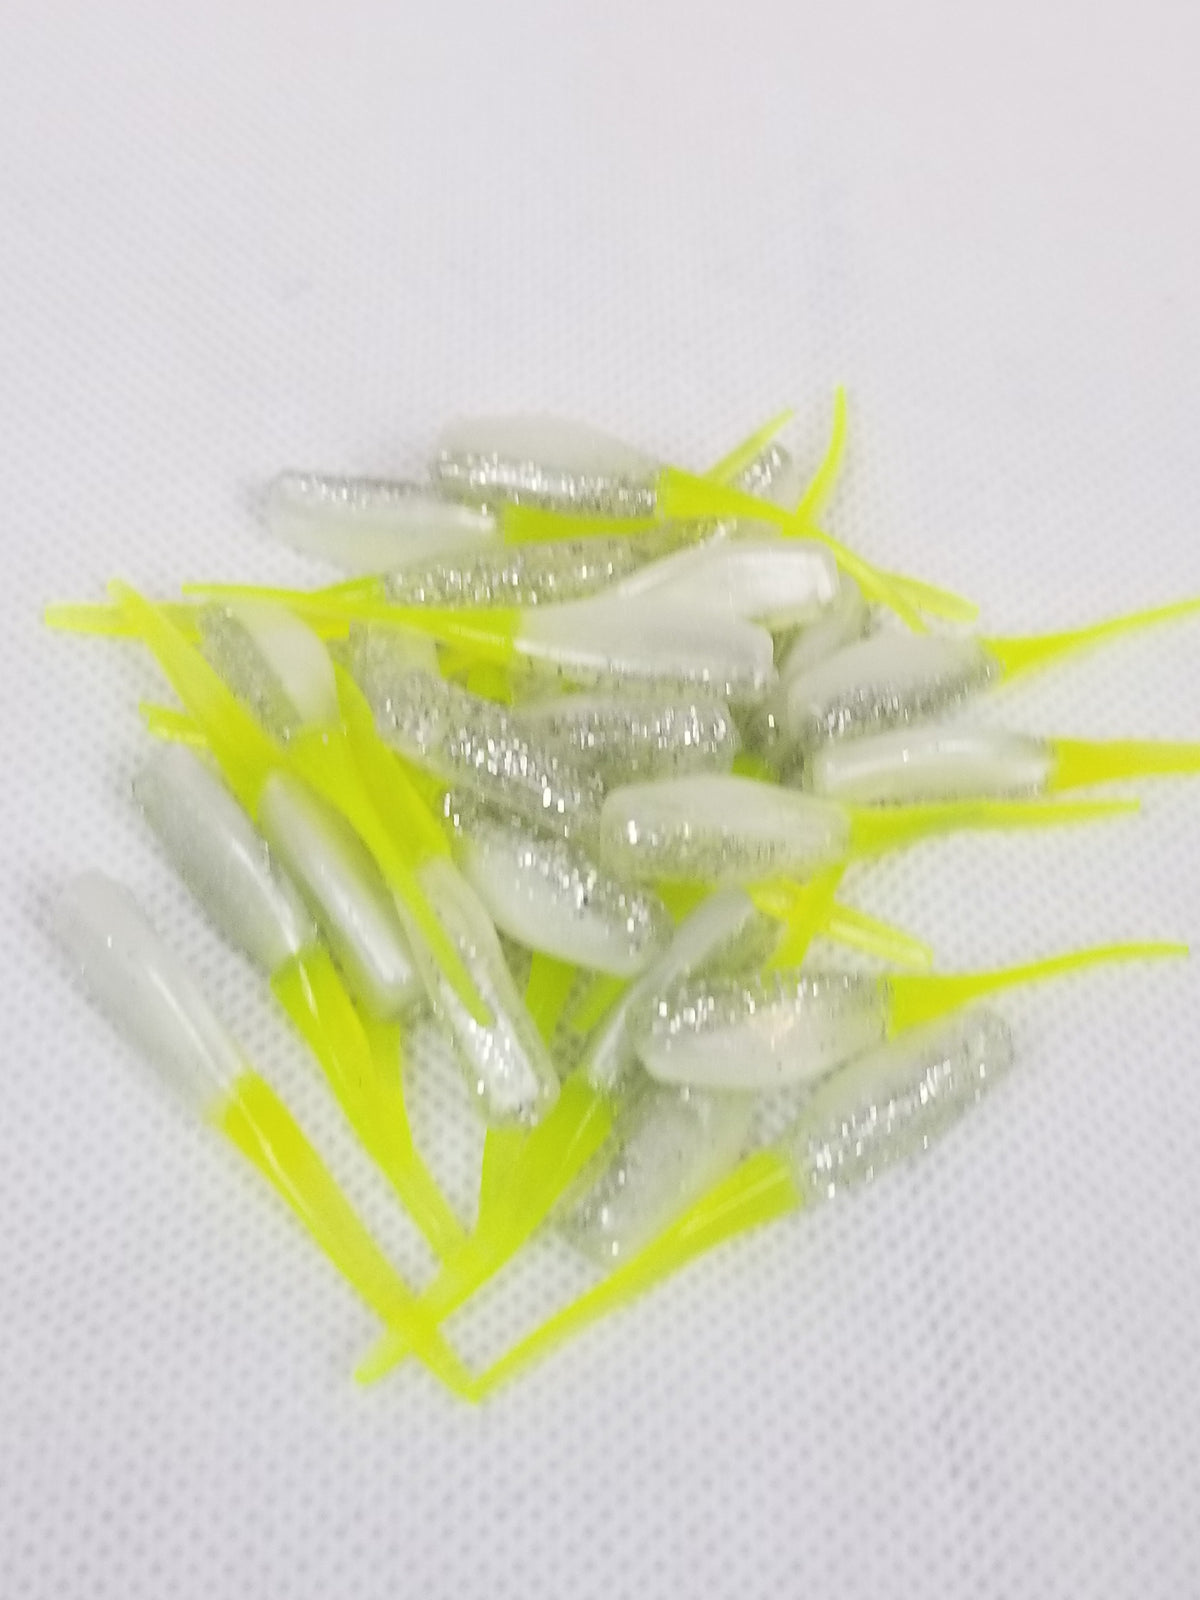 Cam's 2(HOLOGRAM FLAKE) Stinger Shad 40pc White Knight & Chartreuse Tail  Crappie Soft Jigs [A Cam's Exclusive]